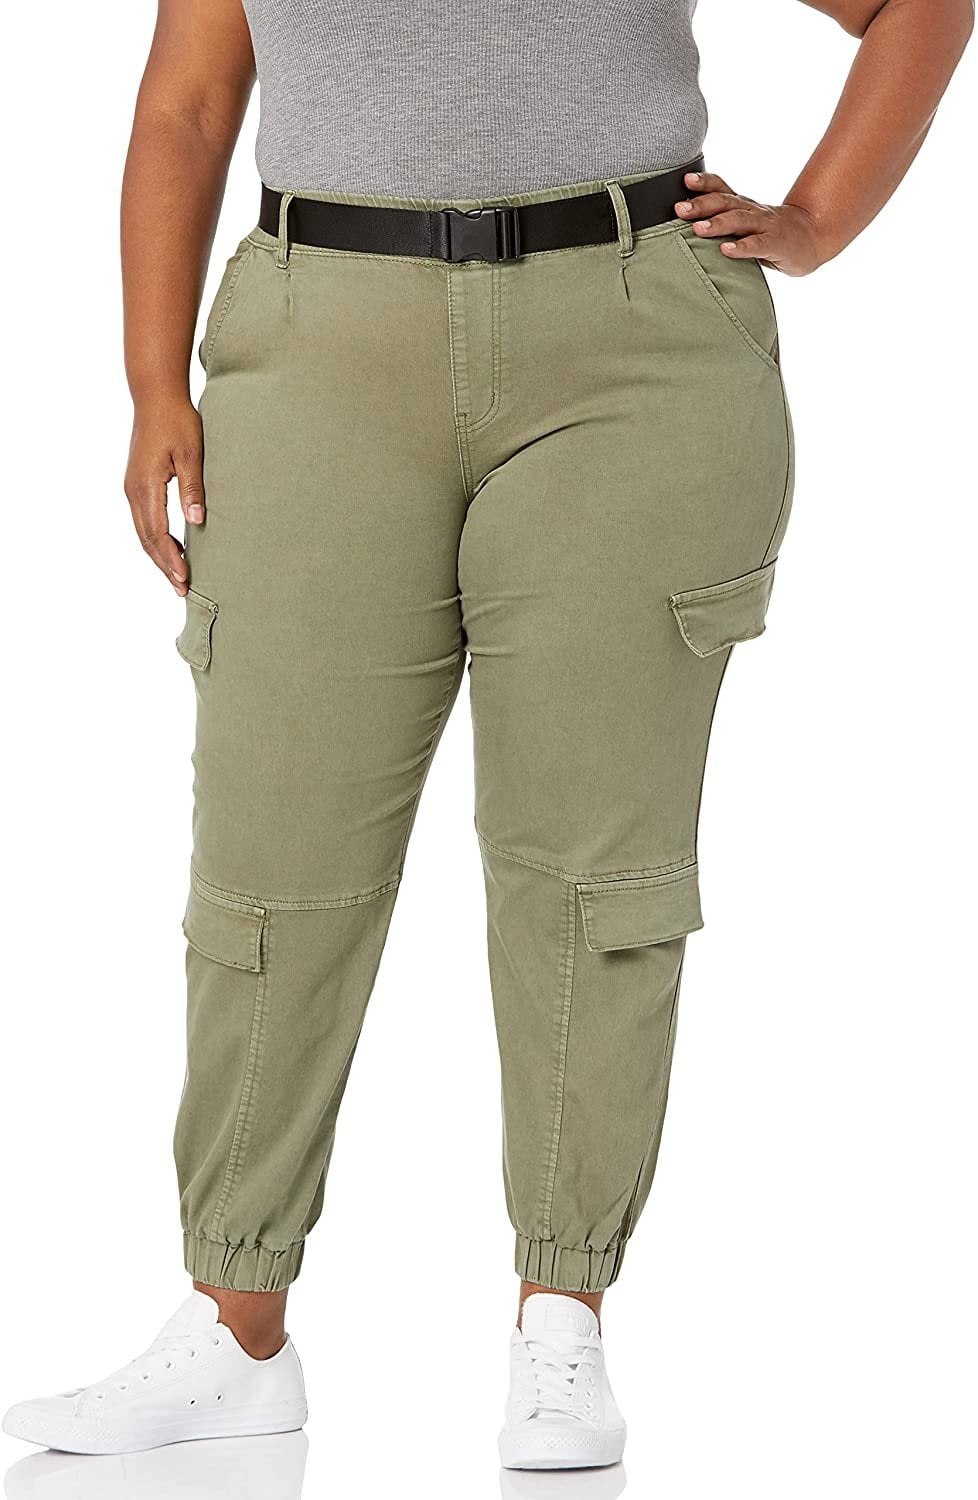 V.I.P. JEANS Cargo Pants for Women Juniors Sizes Camo, Baggy Solid Olive,  24 Plus